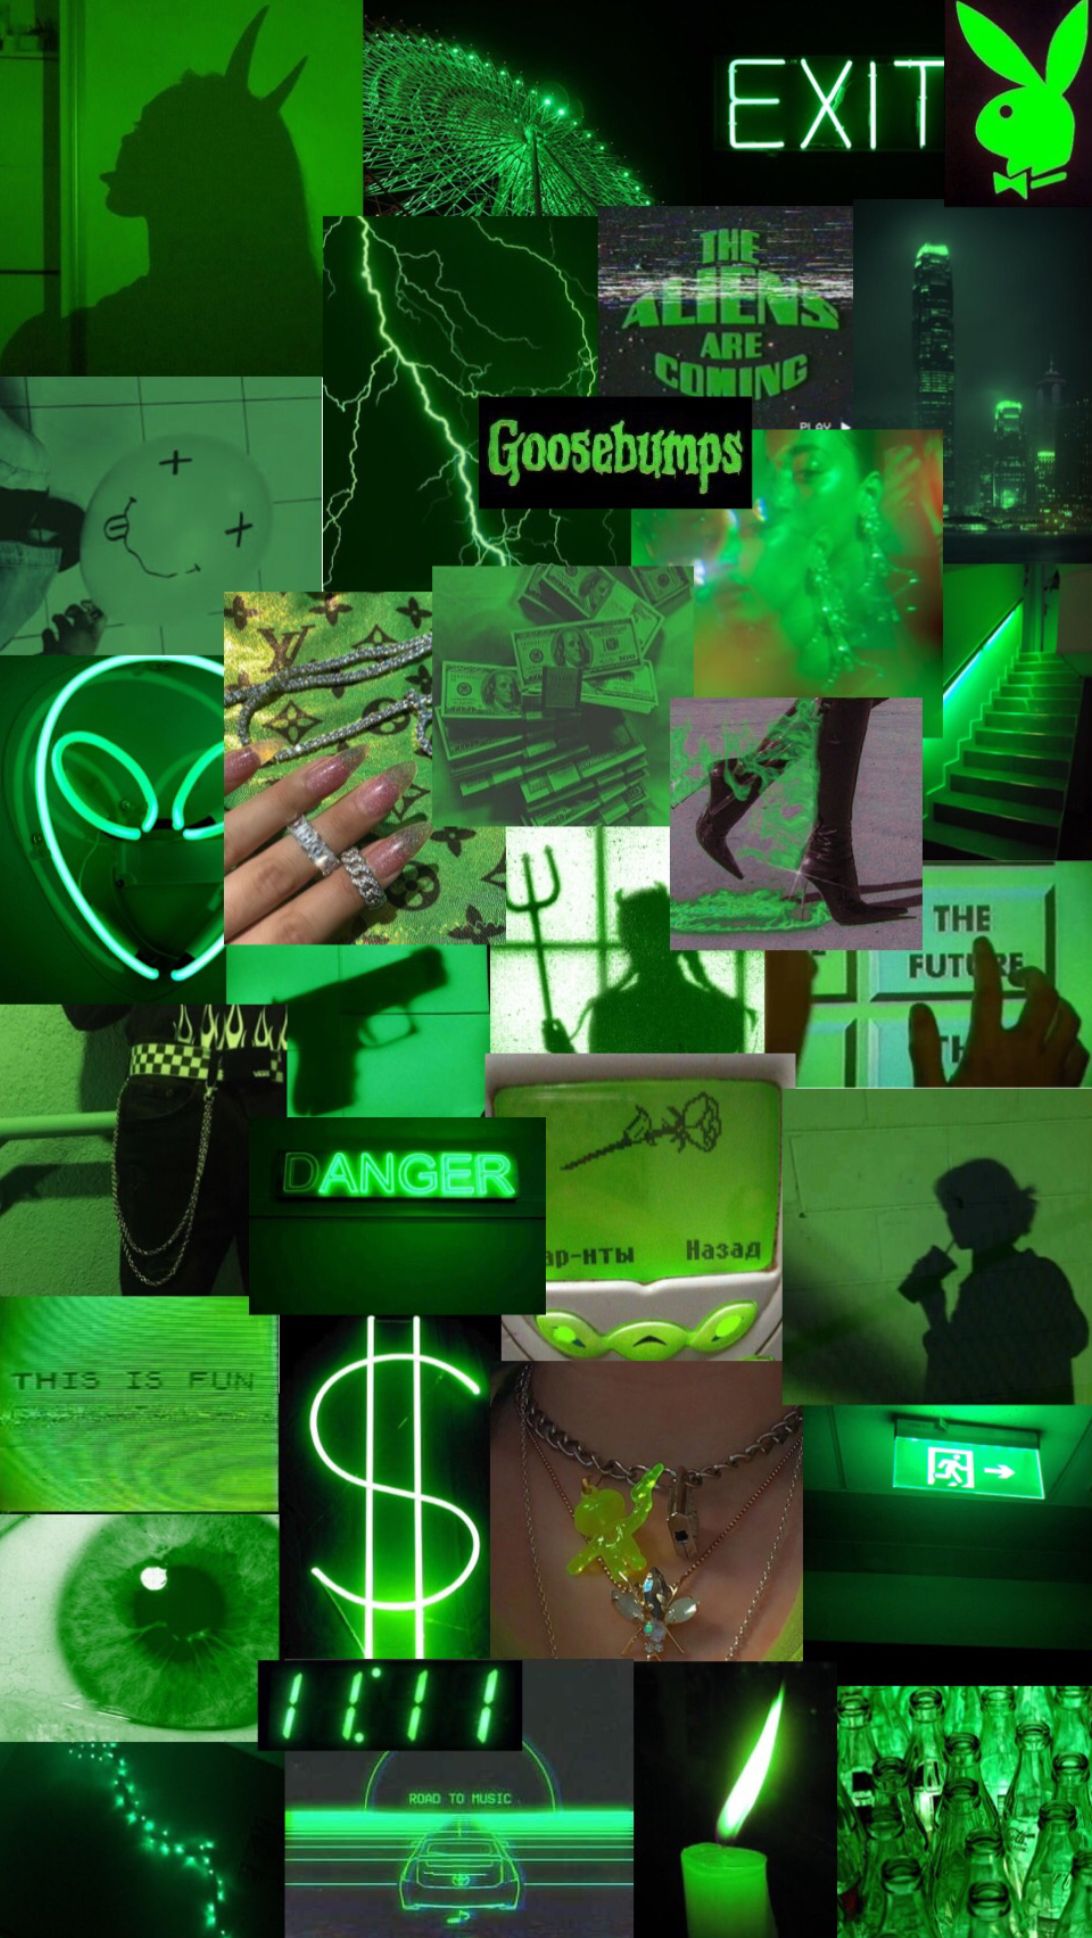 Green aesthetic collage wallpaper iphone neon dark wallpaper iphone iphone wallpaper tumblr aesthetic